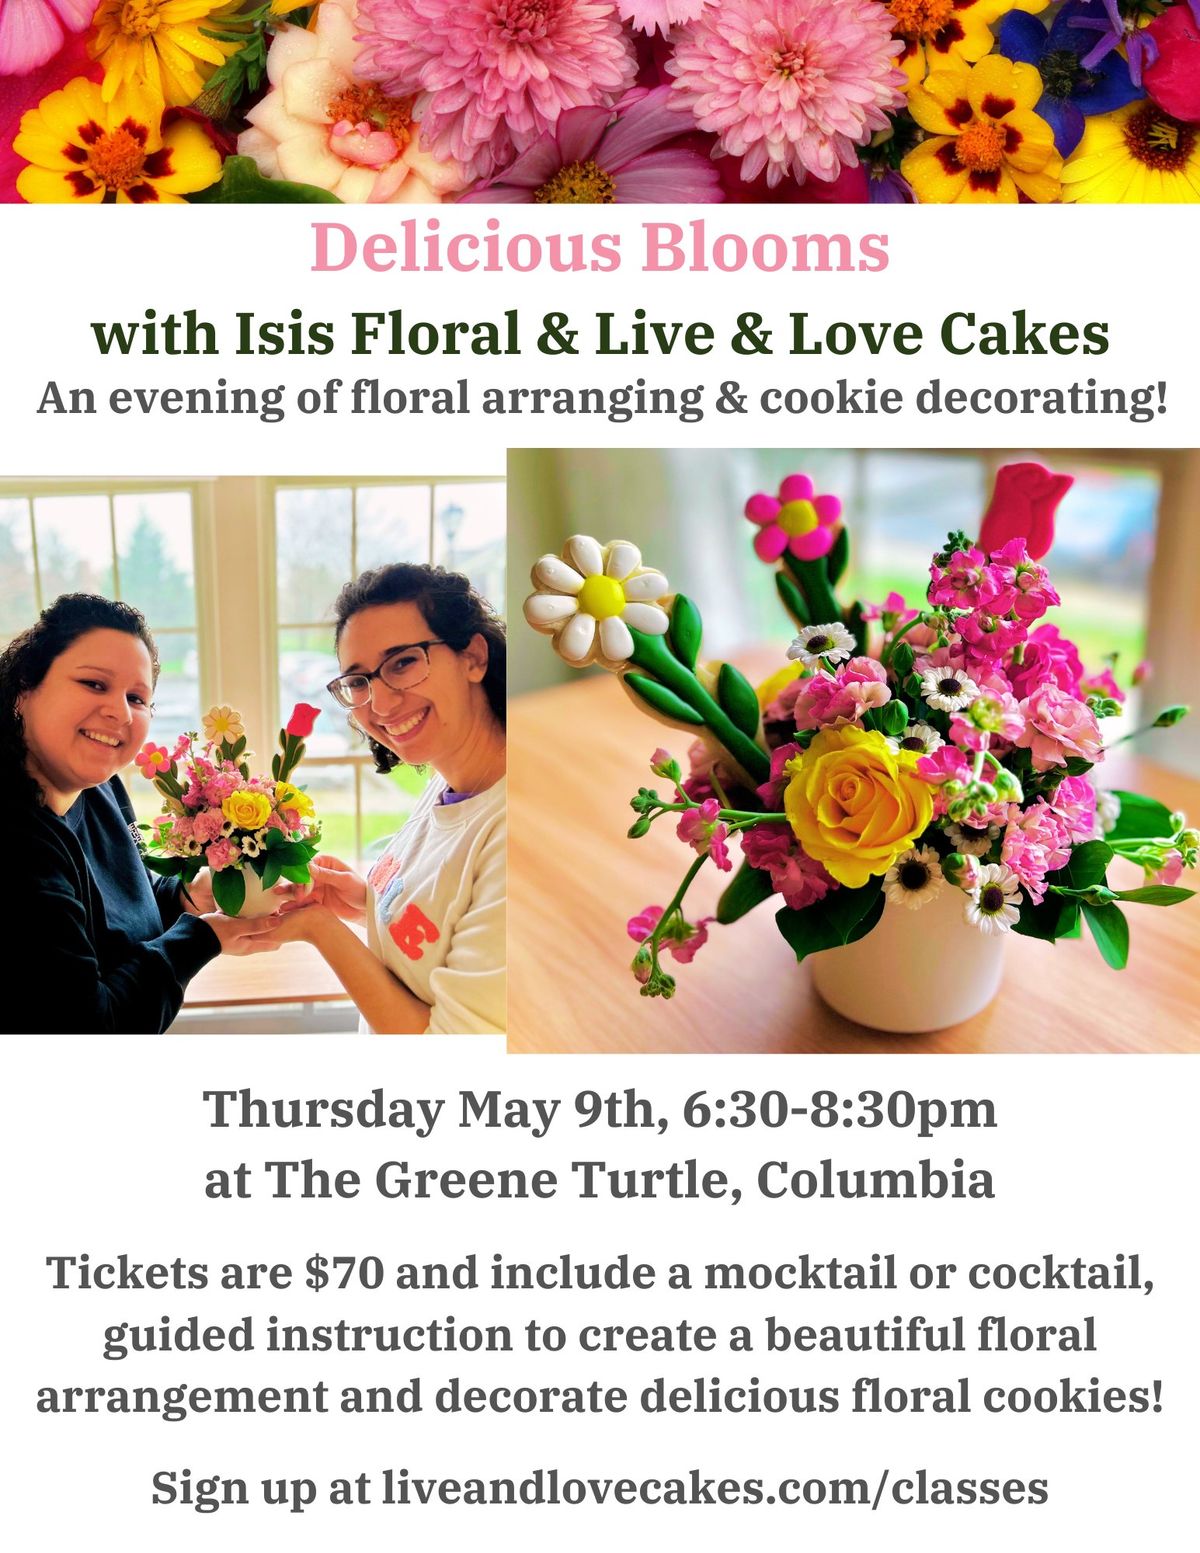 Delicious Blooms with Isis Floral & Live & Love Cakes - Floral Arranging & Cookie Decorating Class